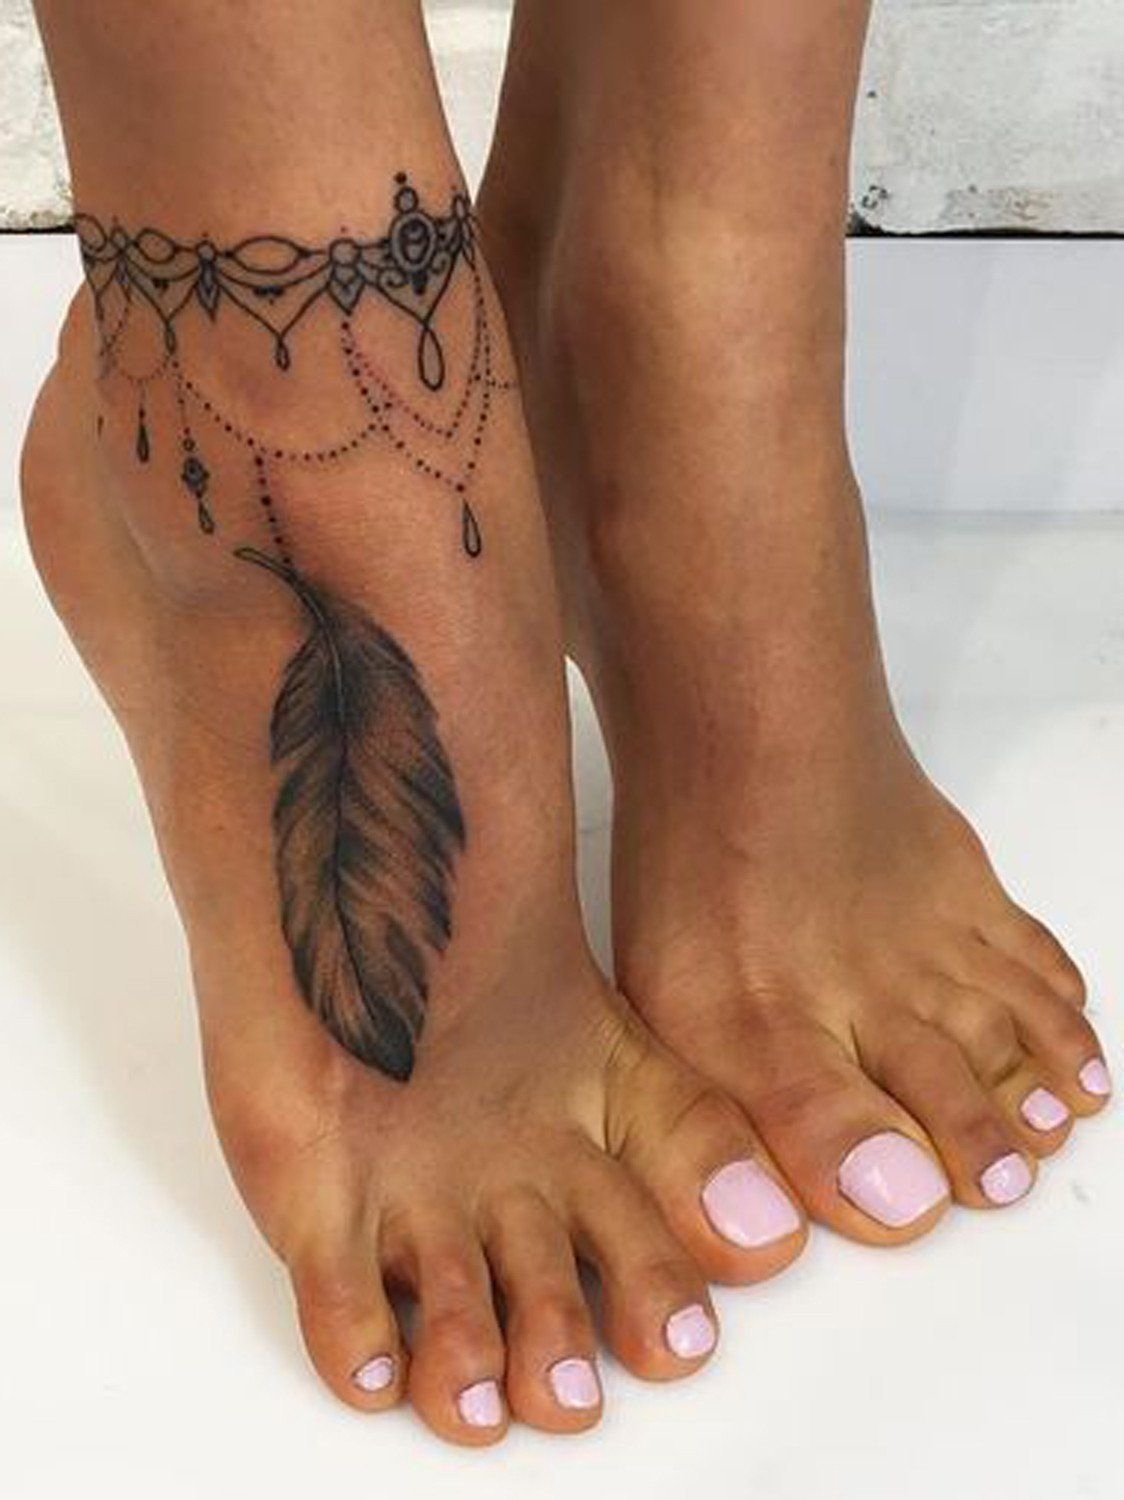 10 Perfect Tattoo Ideas For The Foot 20 feather tattoo ideas for women ankle foot tattoo black henna 3 2022